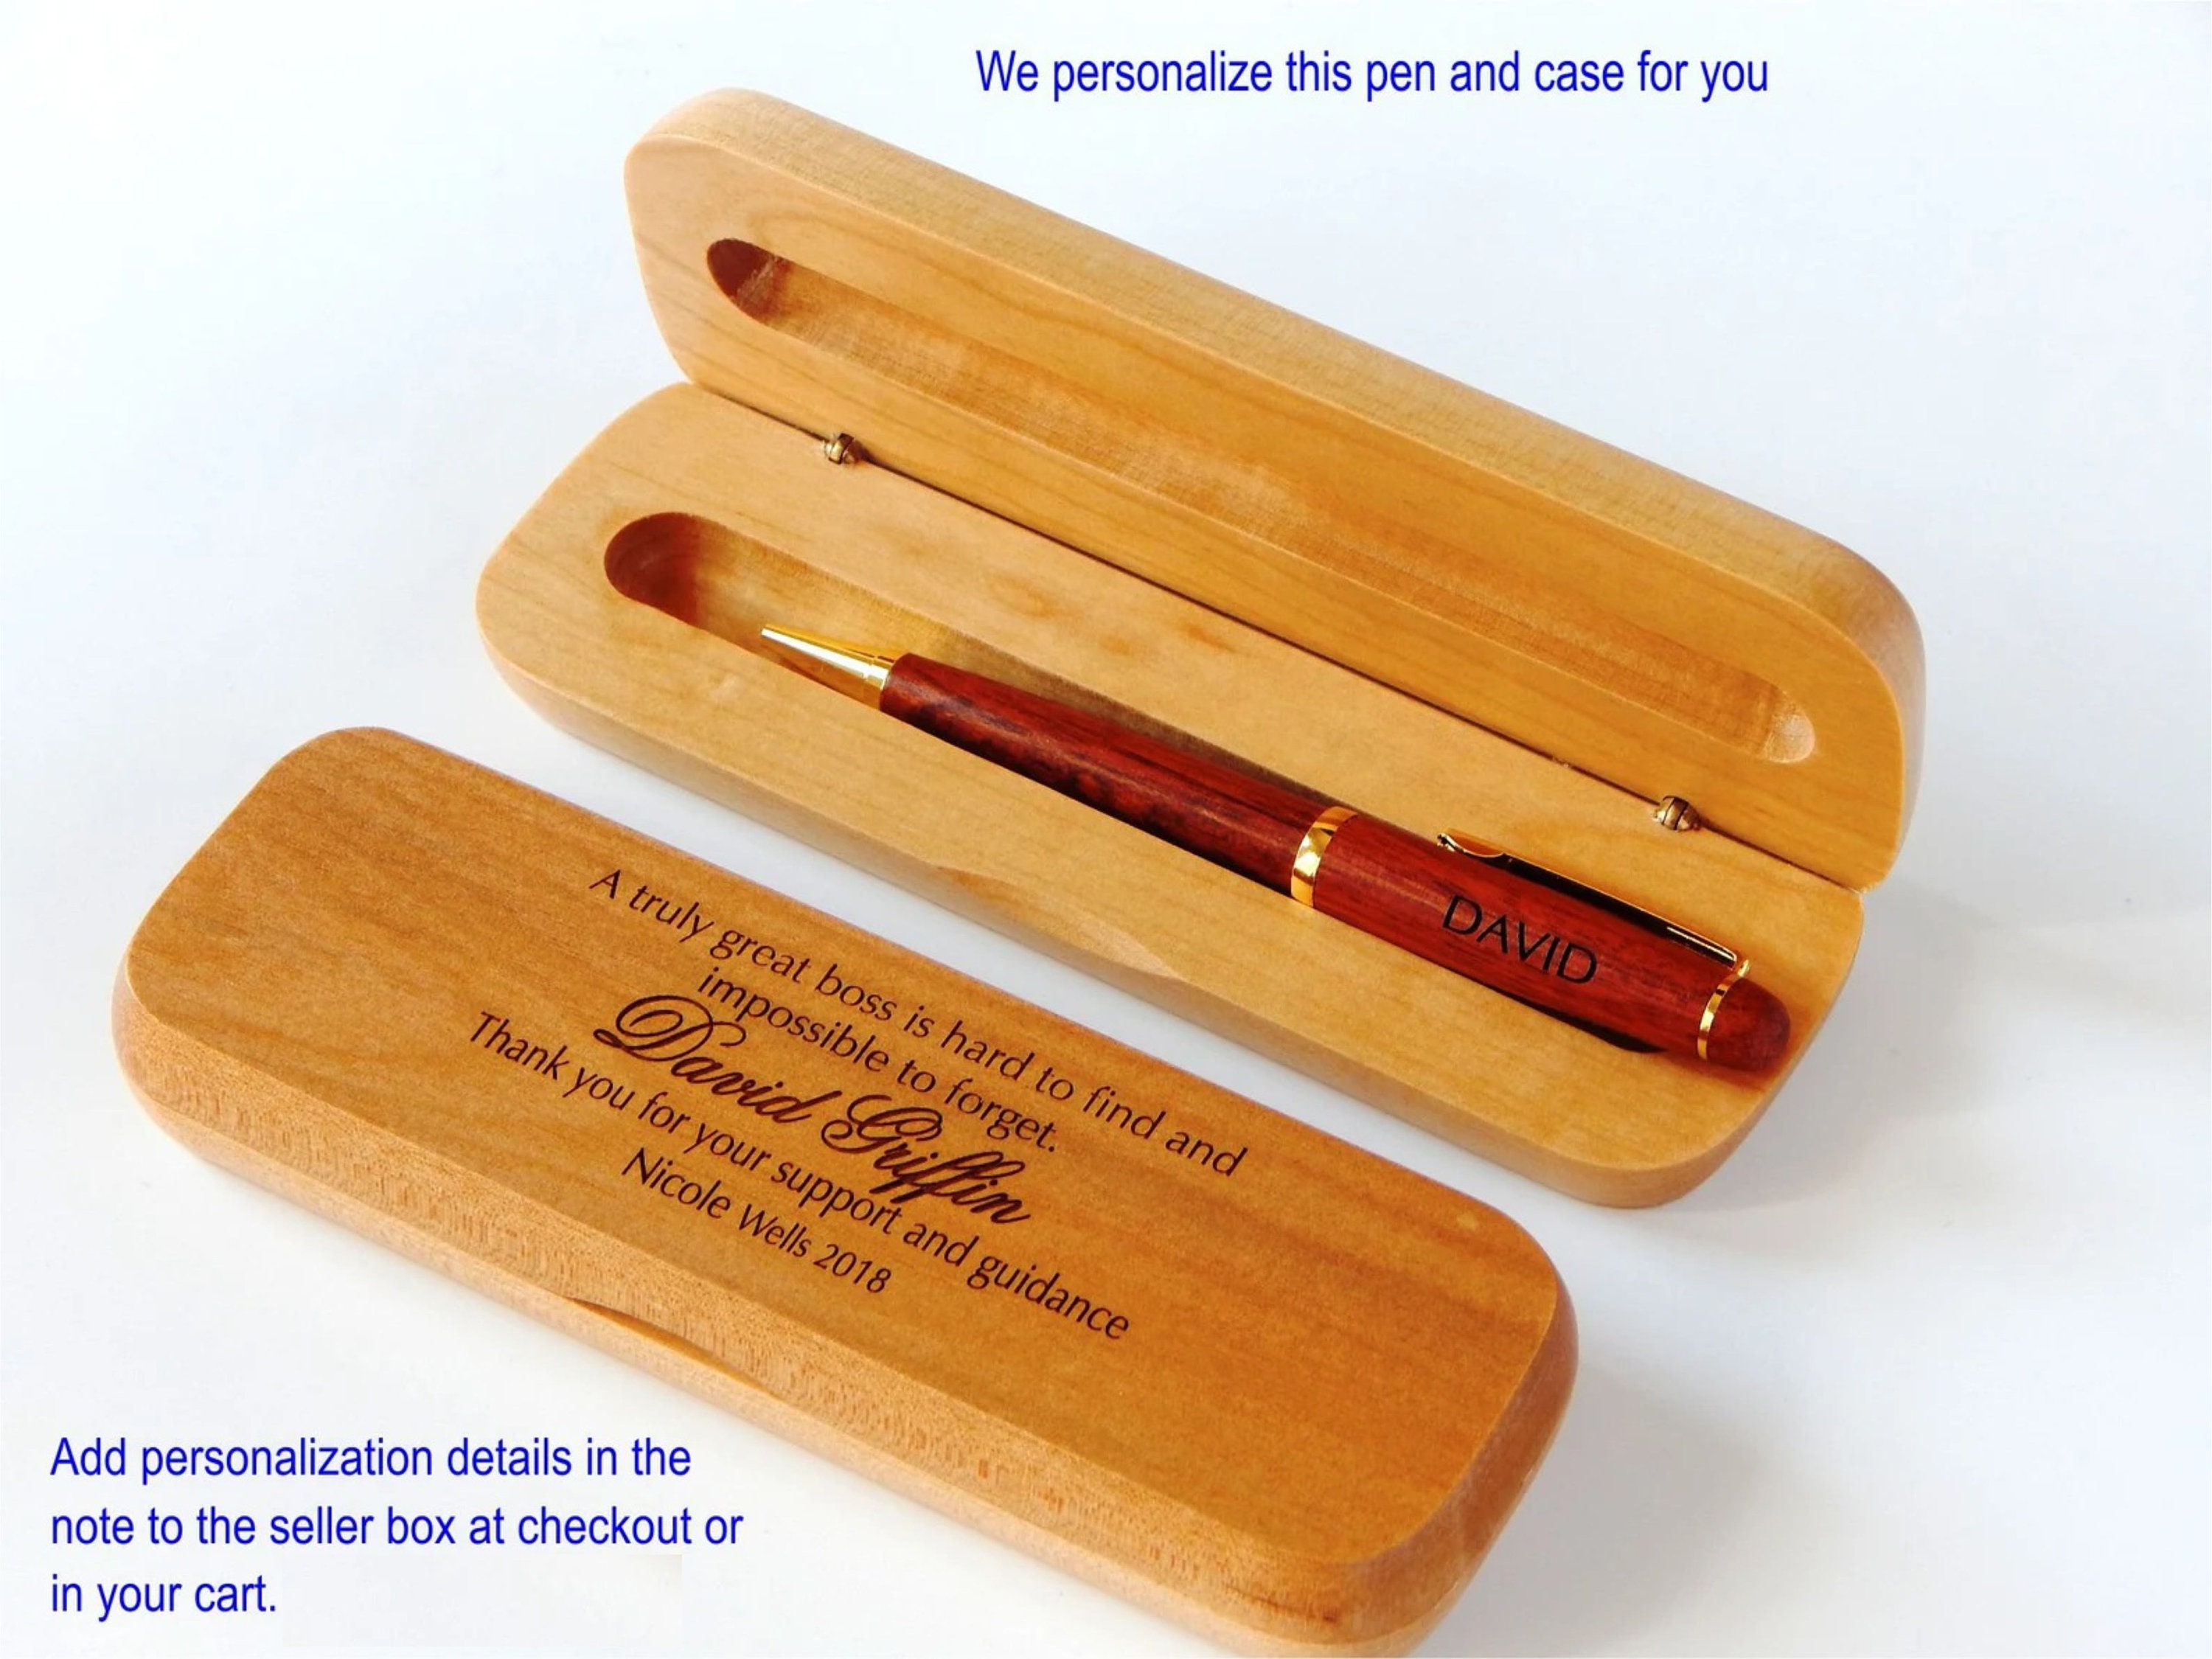 13. Personalized Wooden Pen